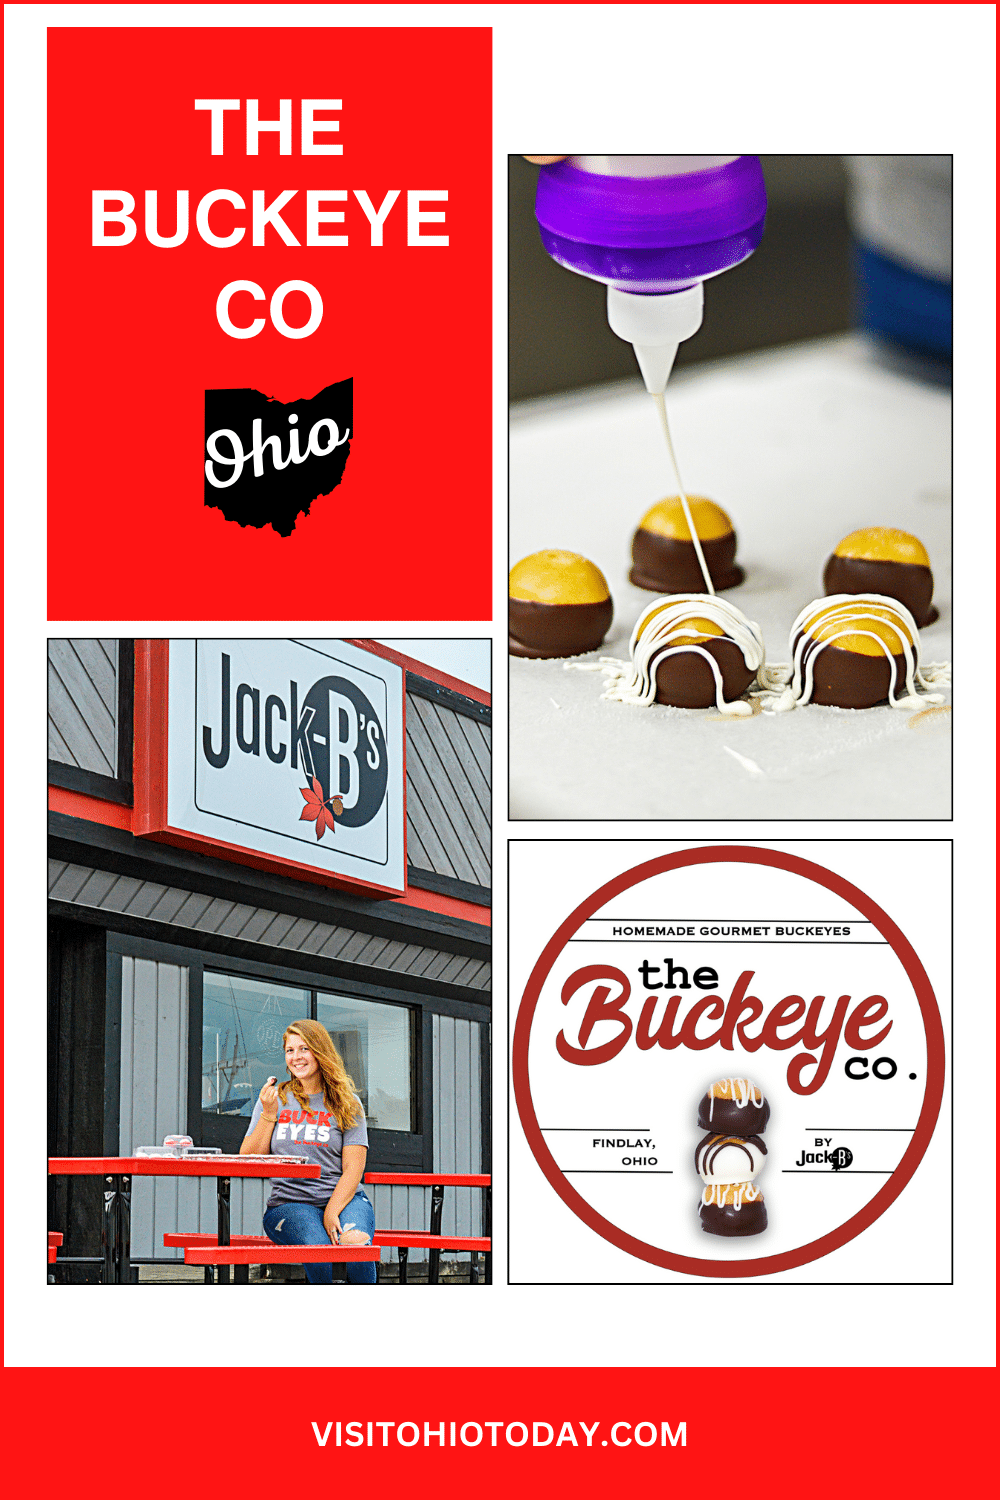 The Buckeye Co. by Jack-B’s is a homemade gourmet buckeye company owned by Danika Romick. You can find their buckeyes in Findlay and Arlington.